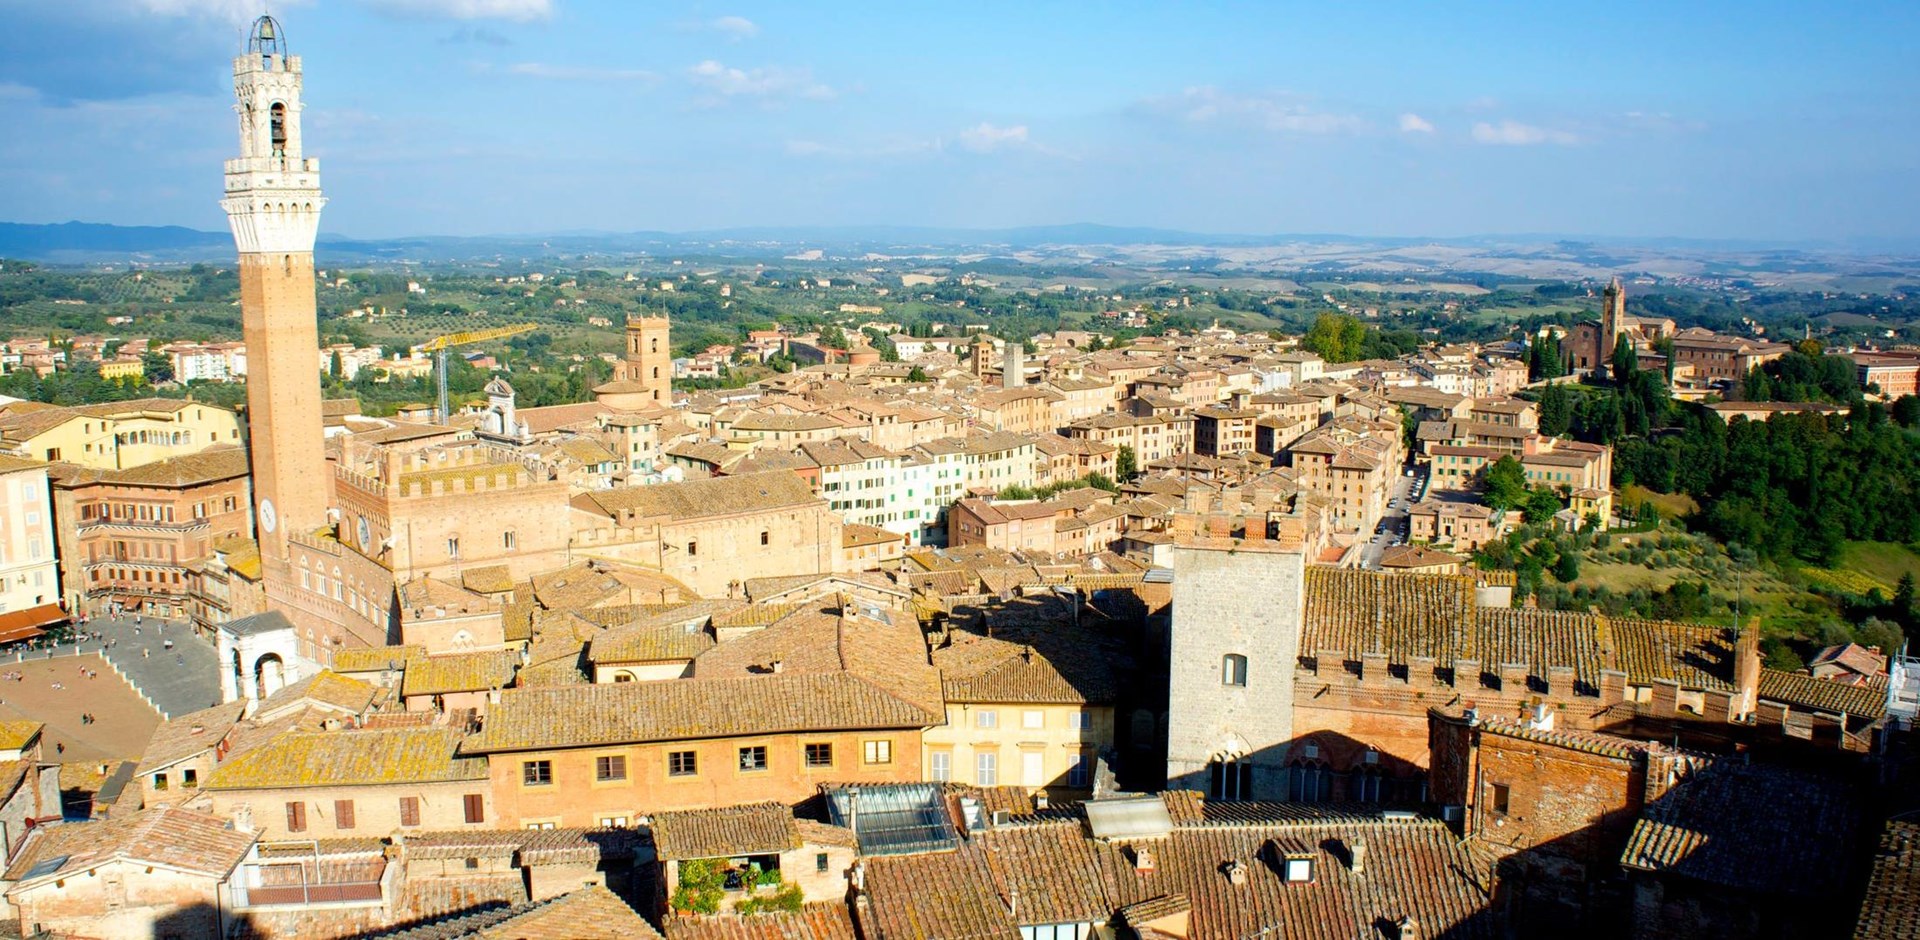 000956_Views over Siena from the Cathedral_Siena_Italy_Laura Mason_002.jpg-Hybris